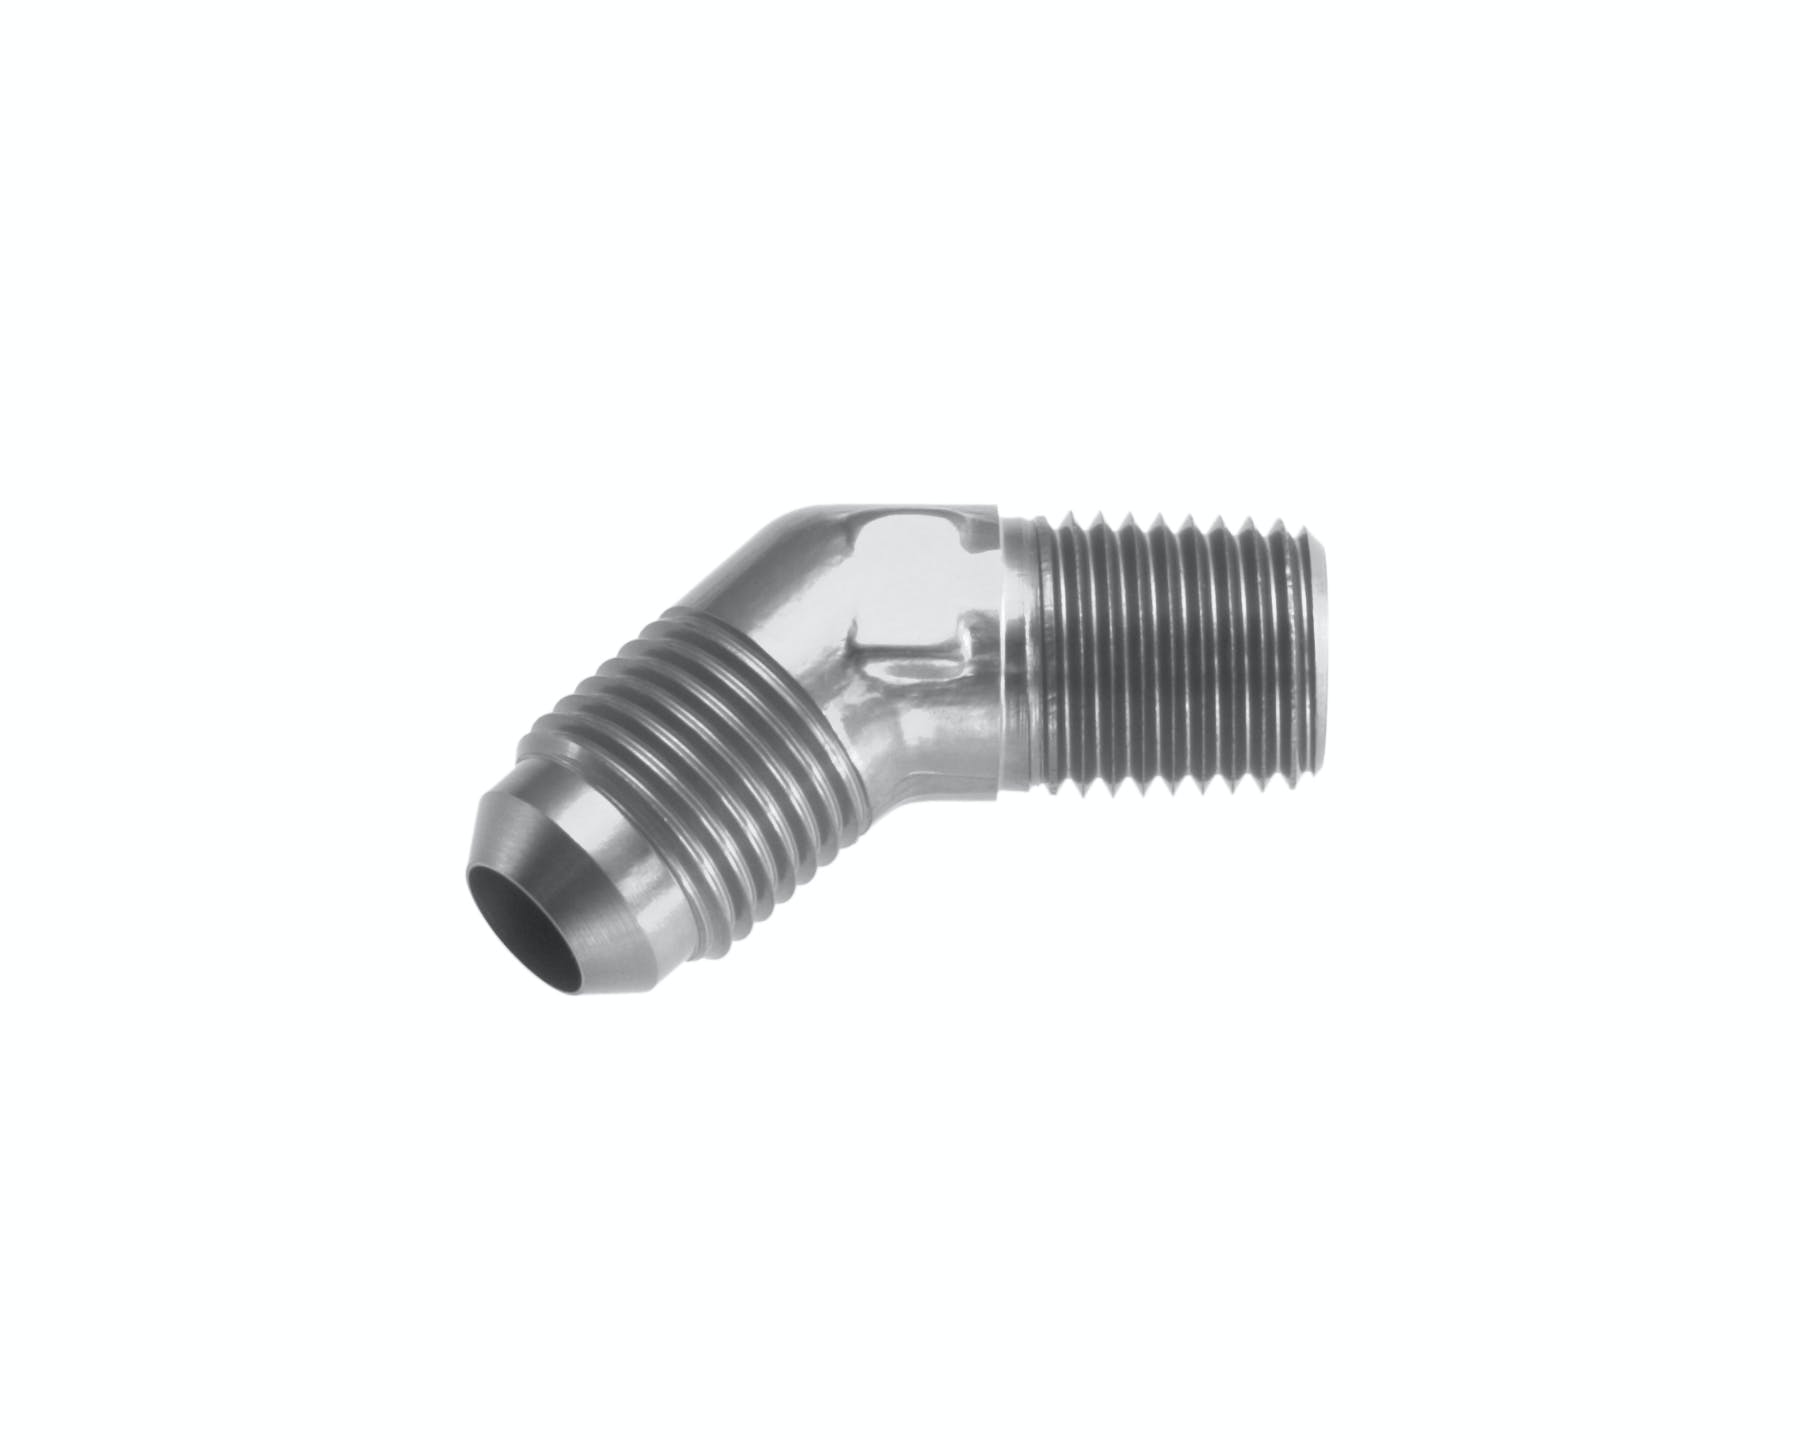 Redhorse Performance 823-06-08-5 -06 45 degree Male adapter to -08 (1/2in) NPT Male - clear